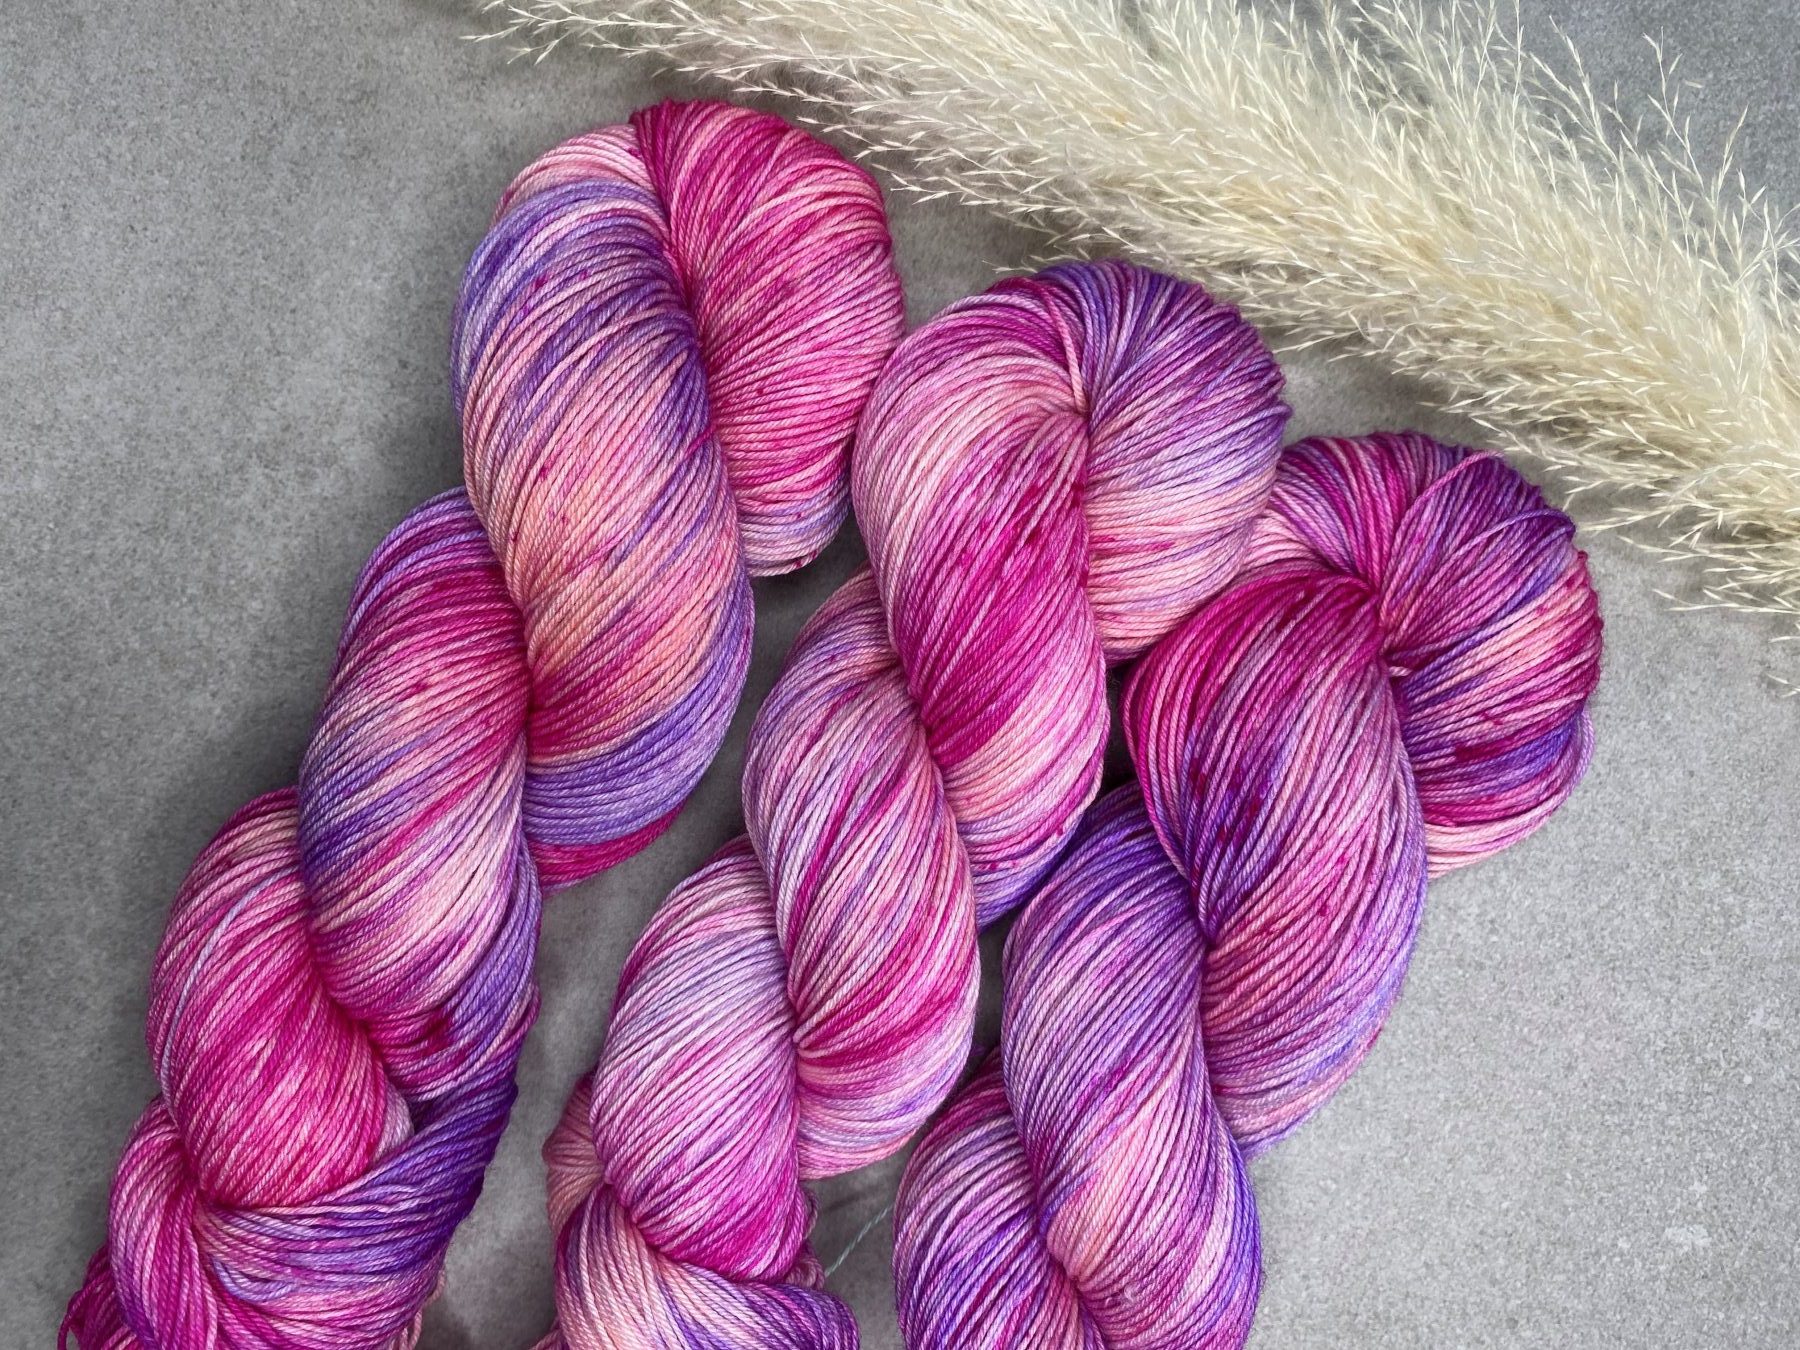 Darcy - 4 ply - Hand Dyed Yarn